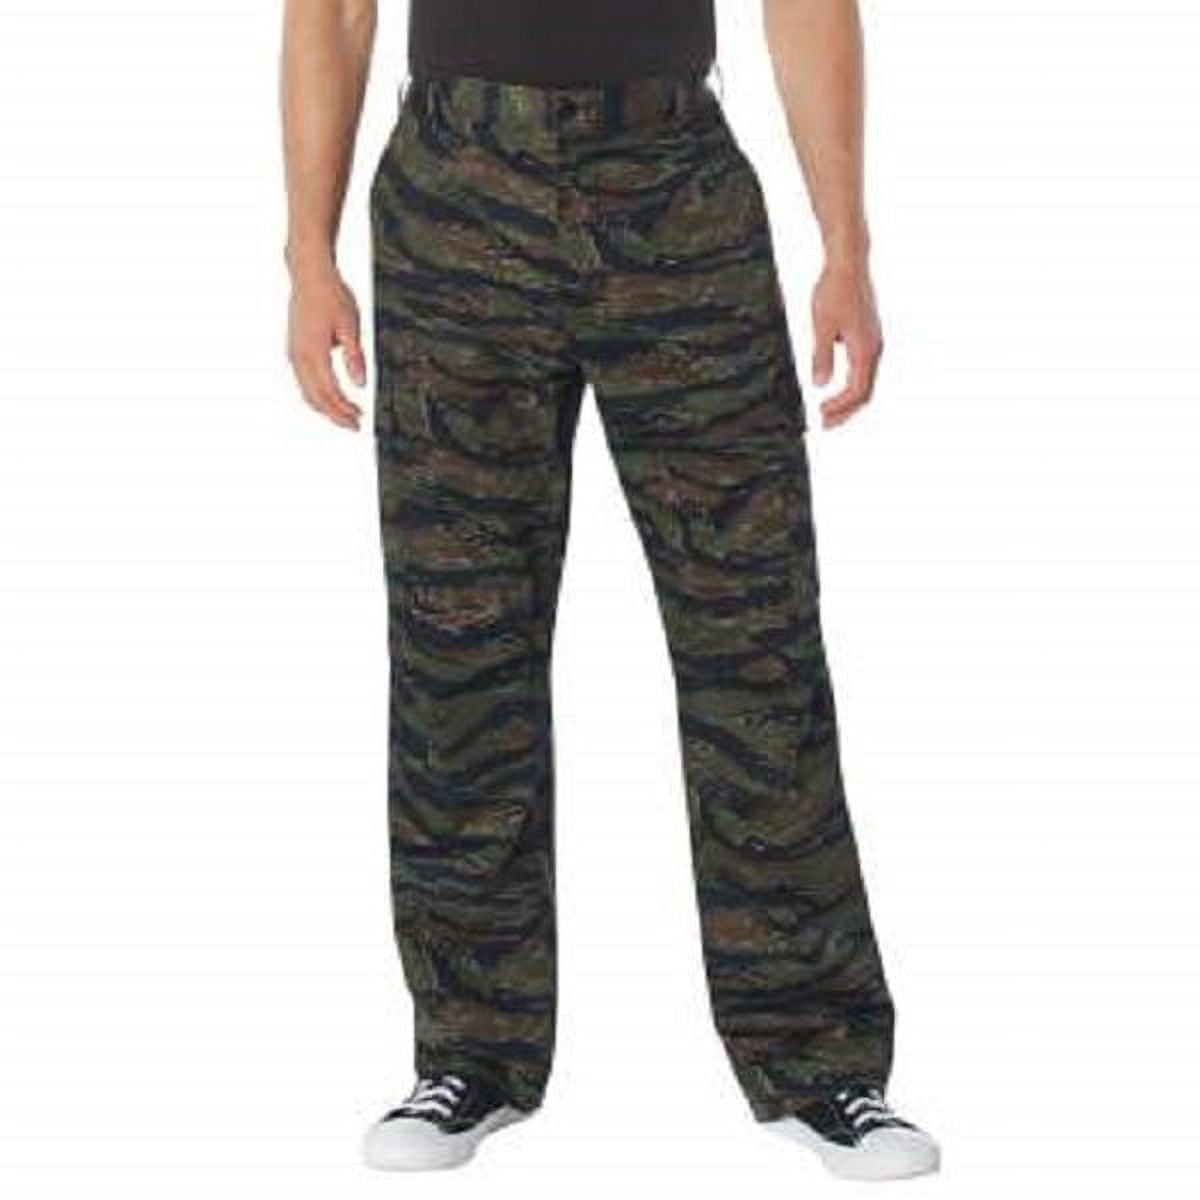 Rothco Relaxed Fit Zipper Fly BDU Pants,Tiger Stripe Camo - Walmart.com